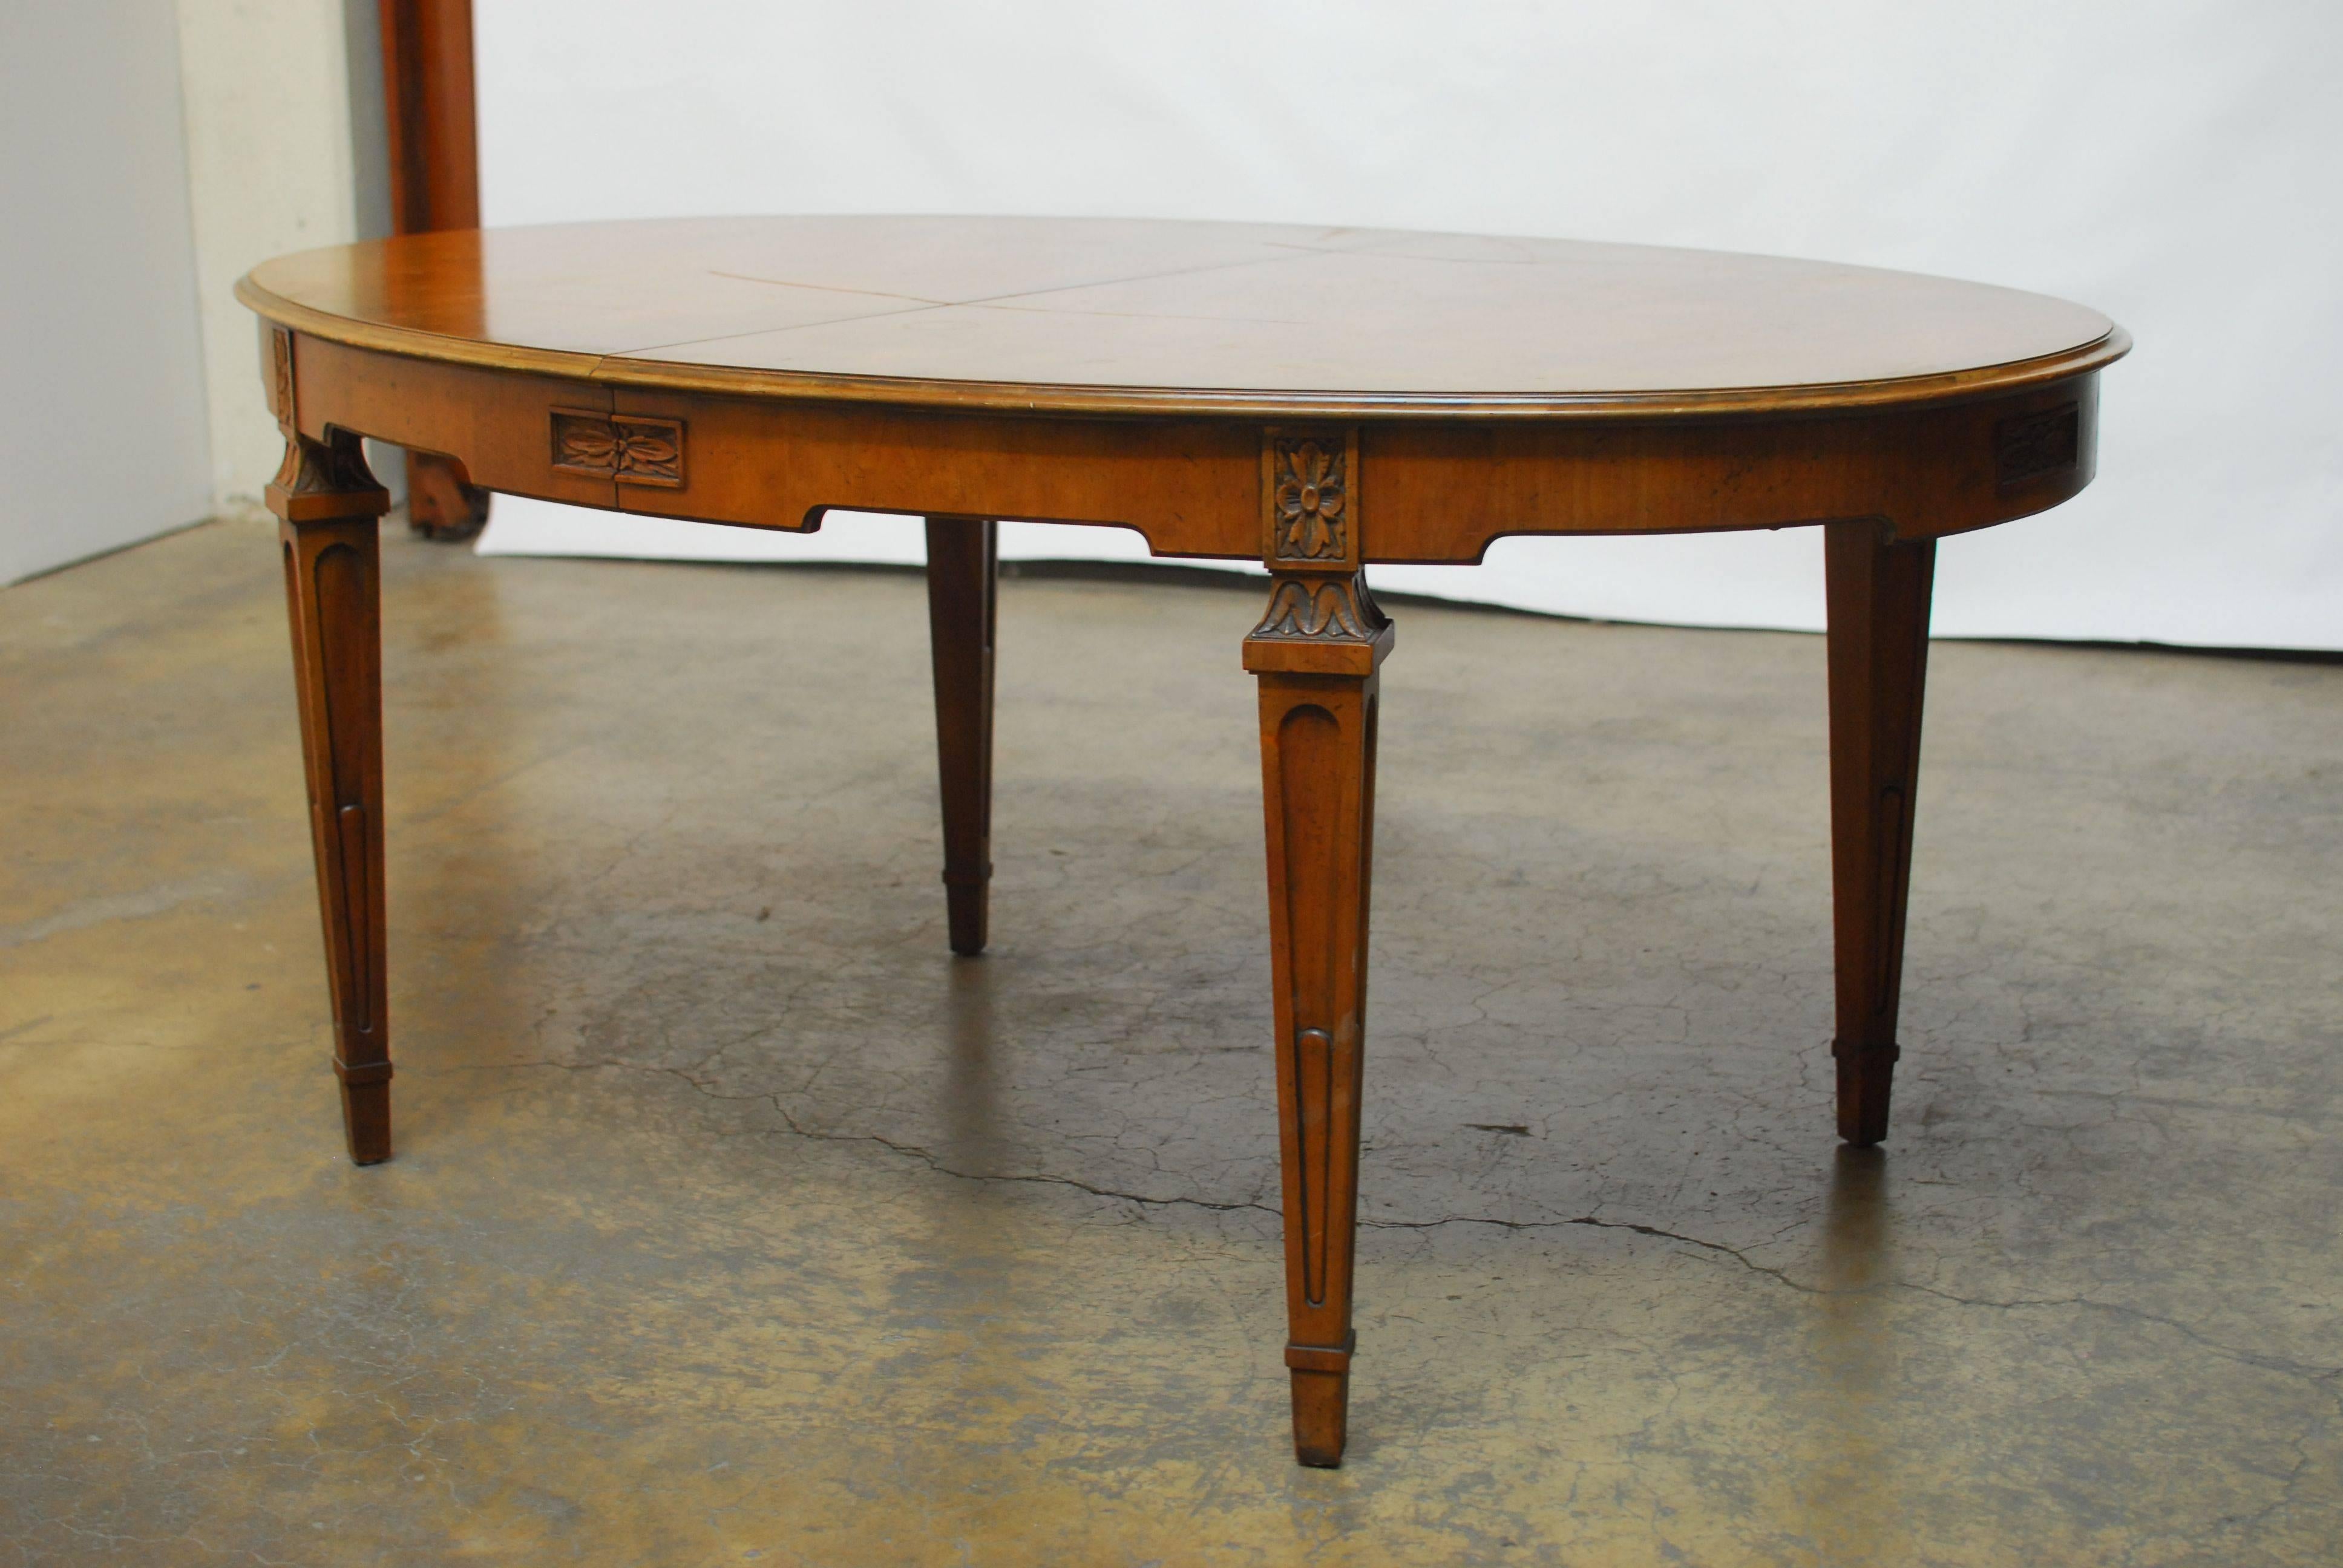 Exquisite Baker furniture dining table from their 